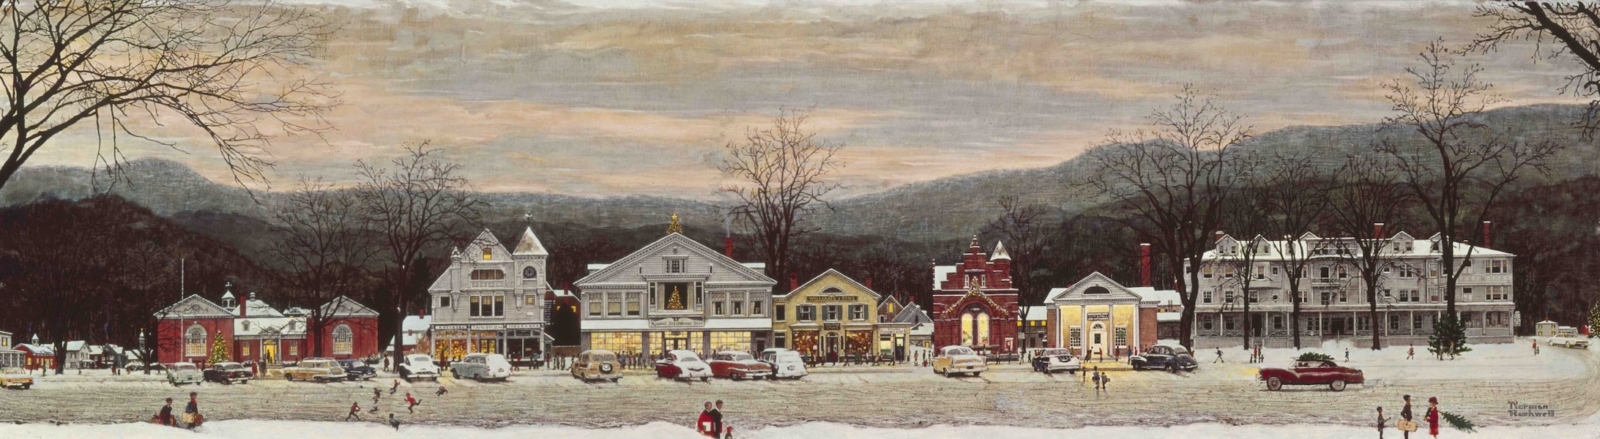 Norman Rockwell (1894-1978), ‘Home for Christmas (Stockbridge Main Street at Christmas),’ 1967. Illustration for ‘Home for Christmas,’ ‘McCall’s,’ December 1967. Oil on board. Norman Rockwell Museum Collection, Norman Rockwell Art Collection Trust, NRACT.1973.078. ©Norman Rockwell Family Agency. All rights reserved.